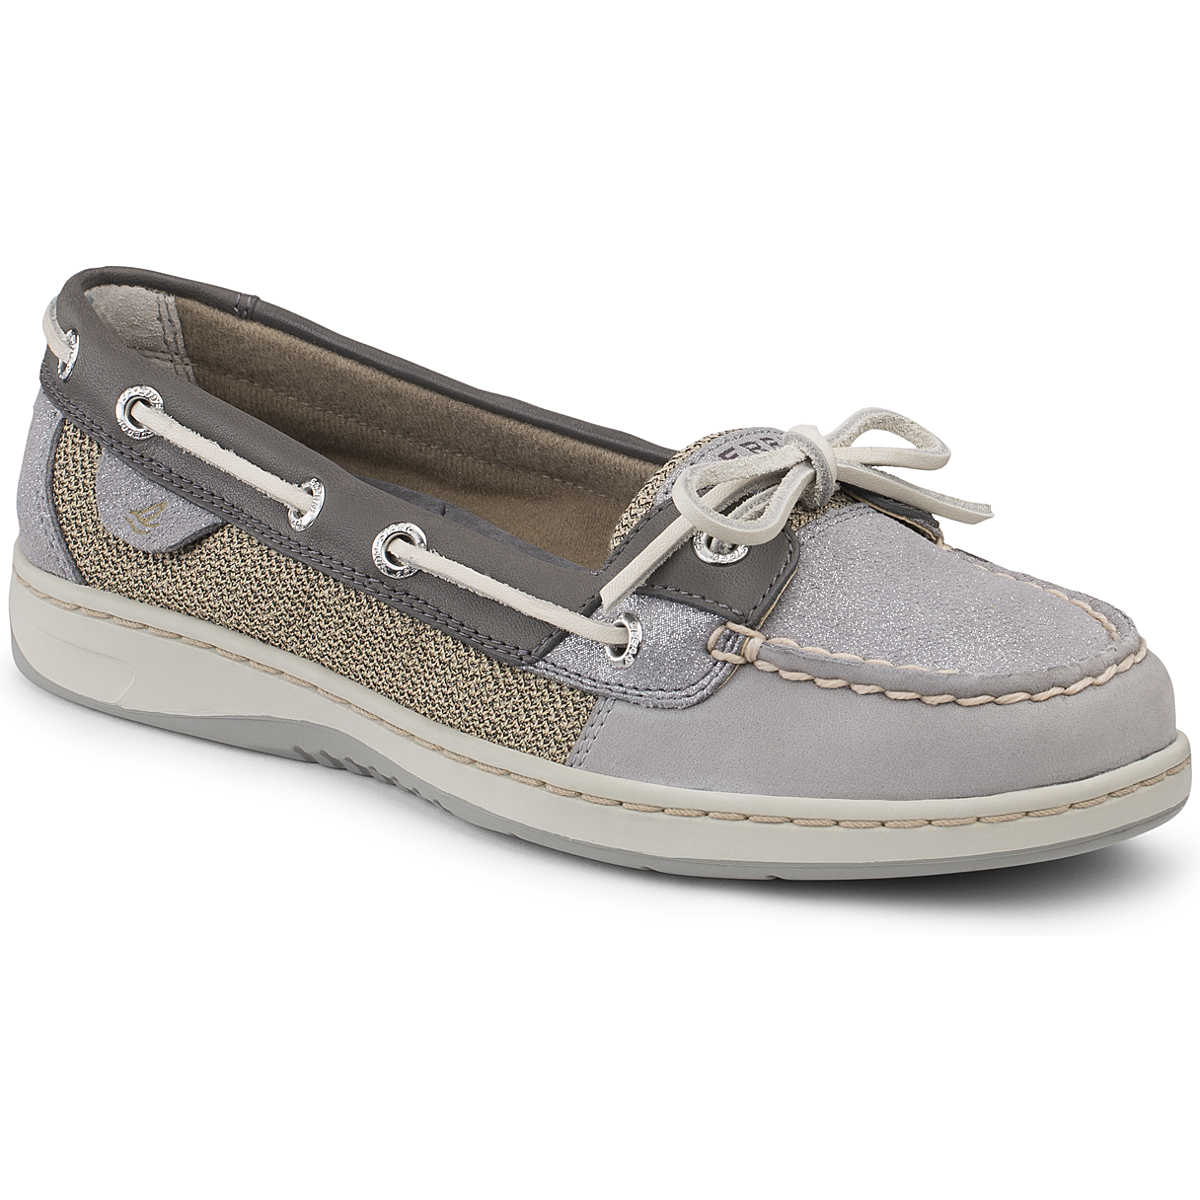 Angelfish Sparkle Suede 2-Eye Boat Shoe, Charcoal Sparkle Suede, dynamic 1